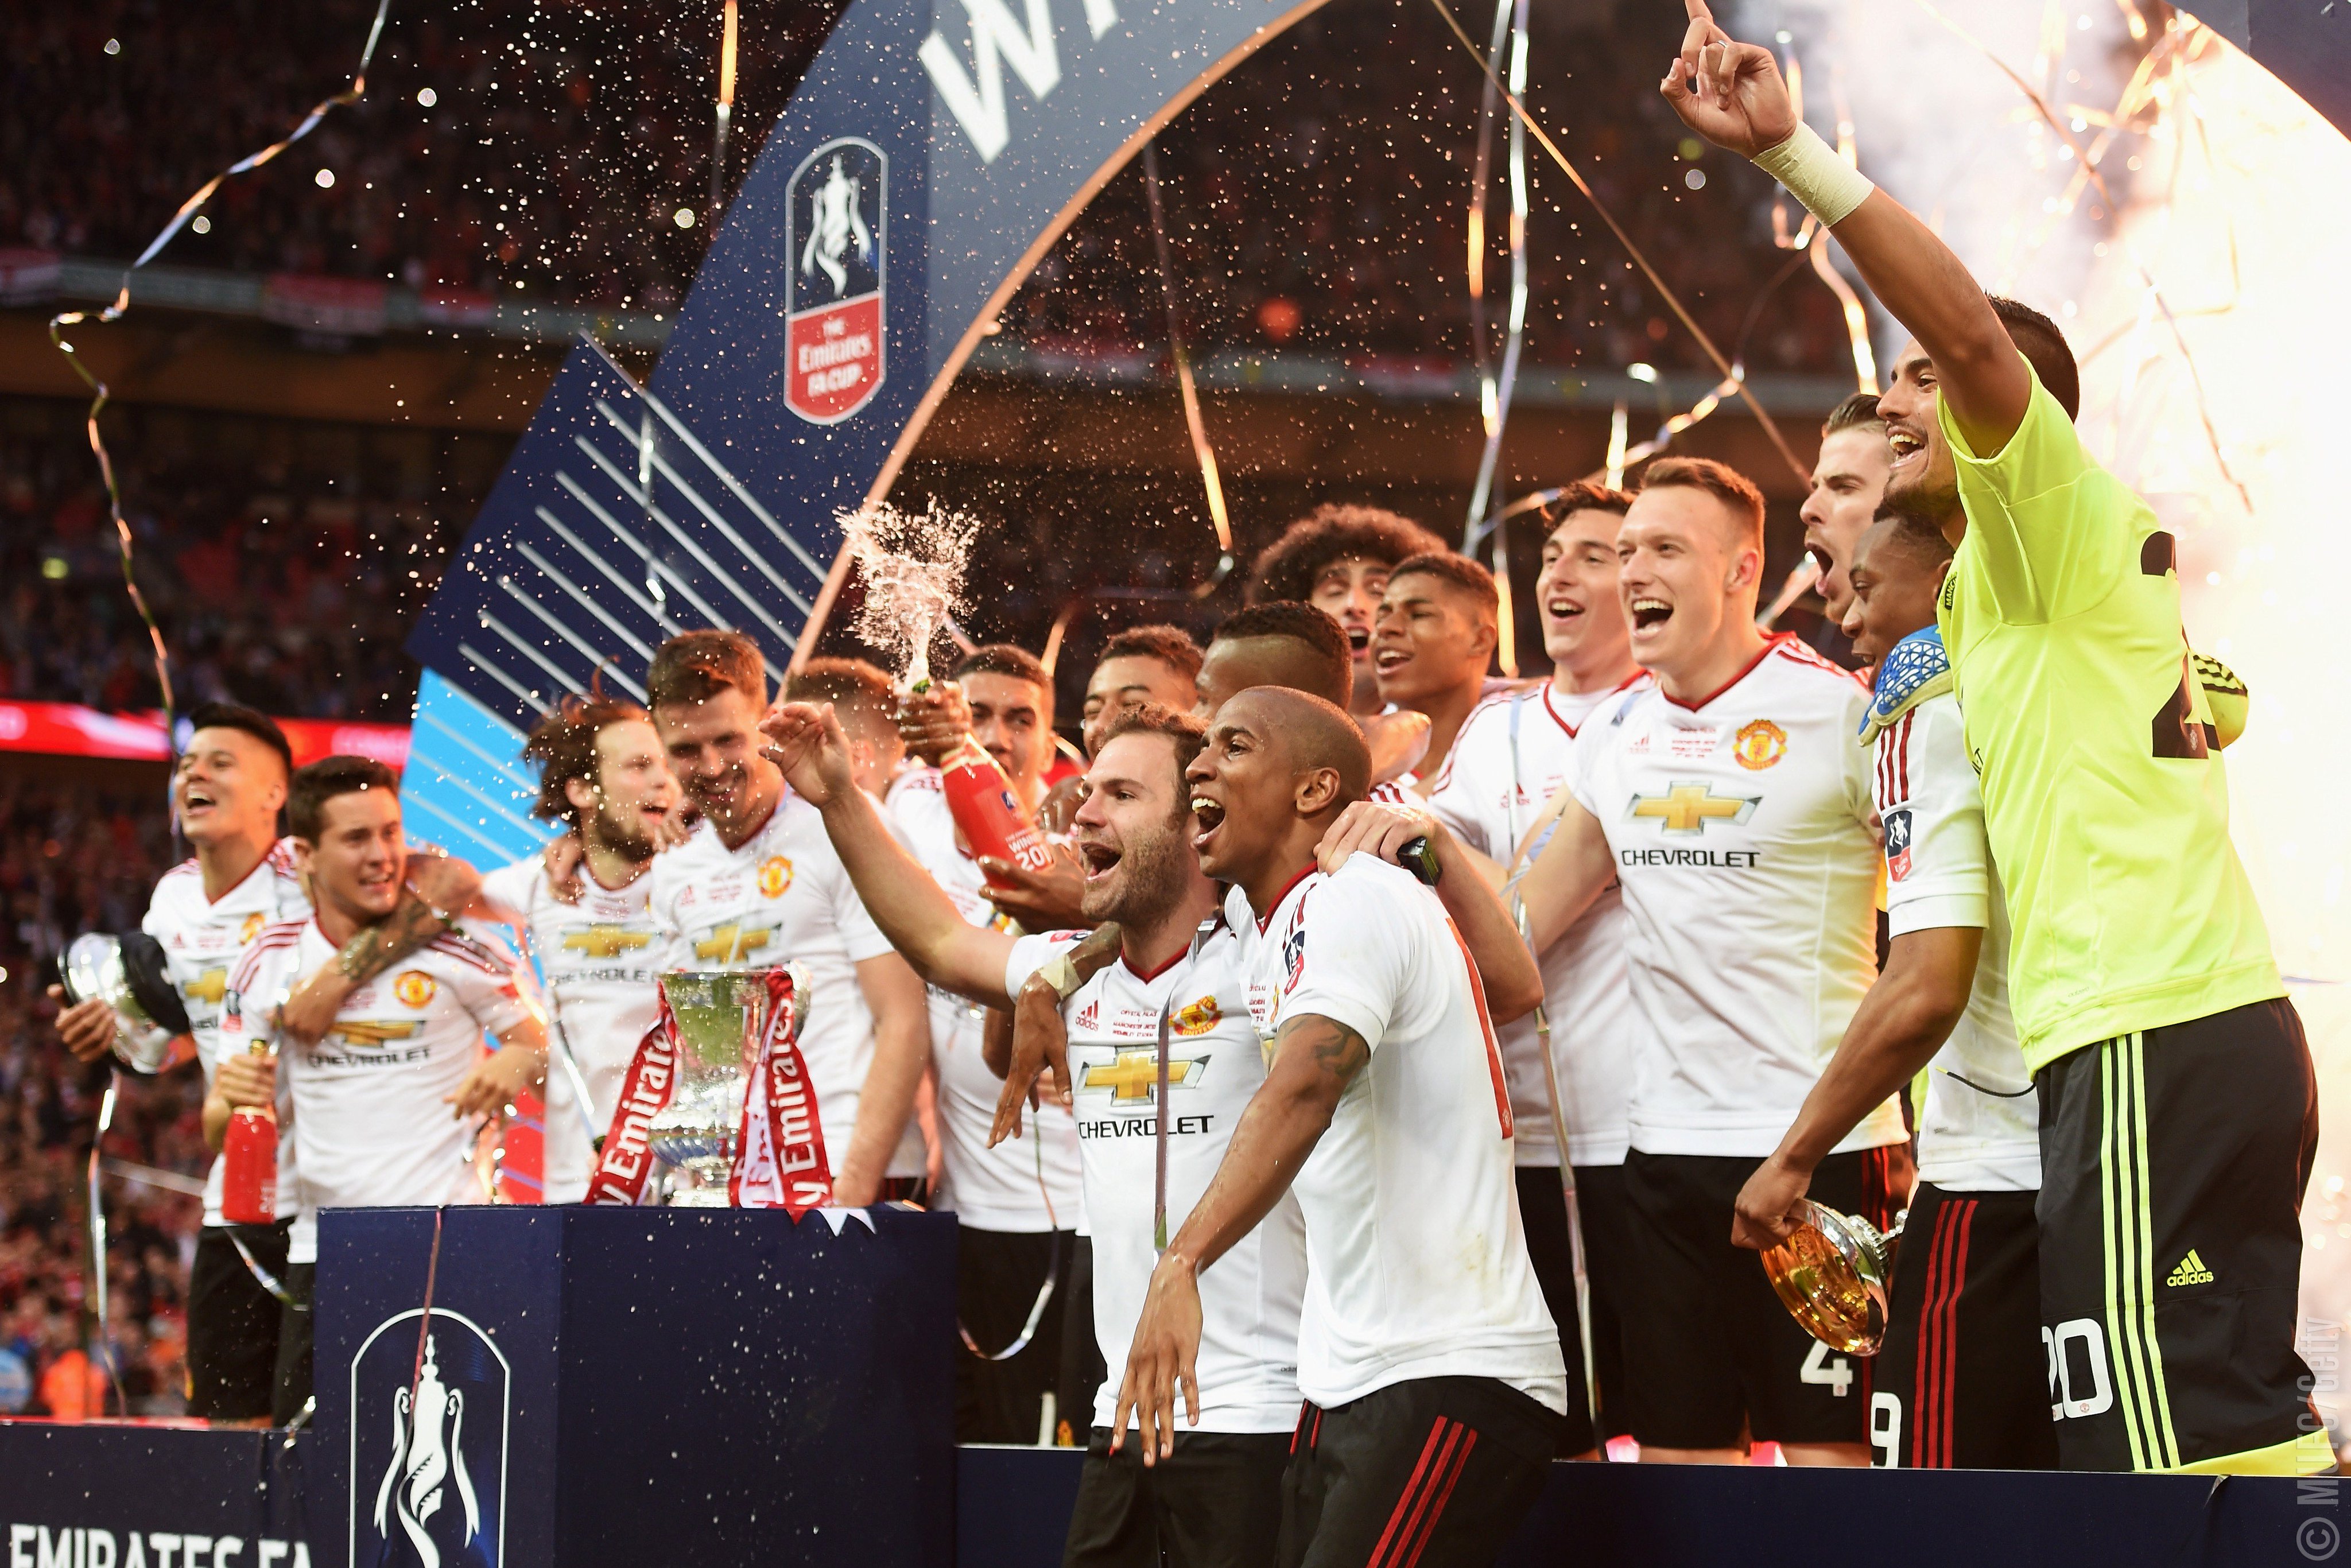 Manchester United on X: 🏆 The FA Cup. It's prestigious. It's inspiring.  It's tradition. Our latest journey starts tonight: come on United! 🔴 #MUFC